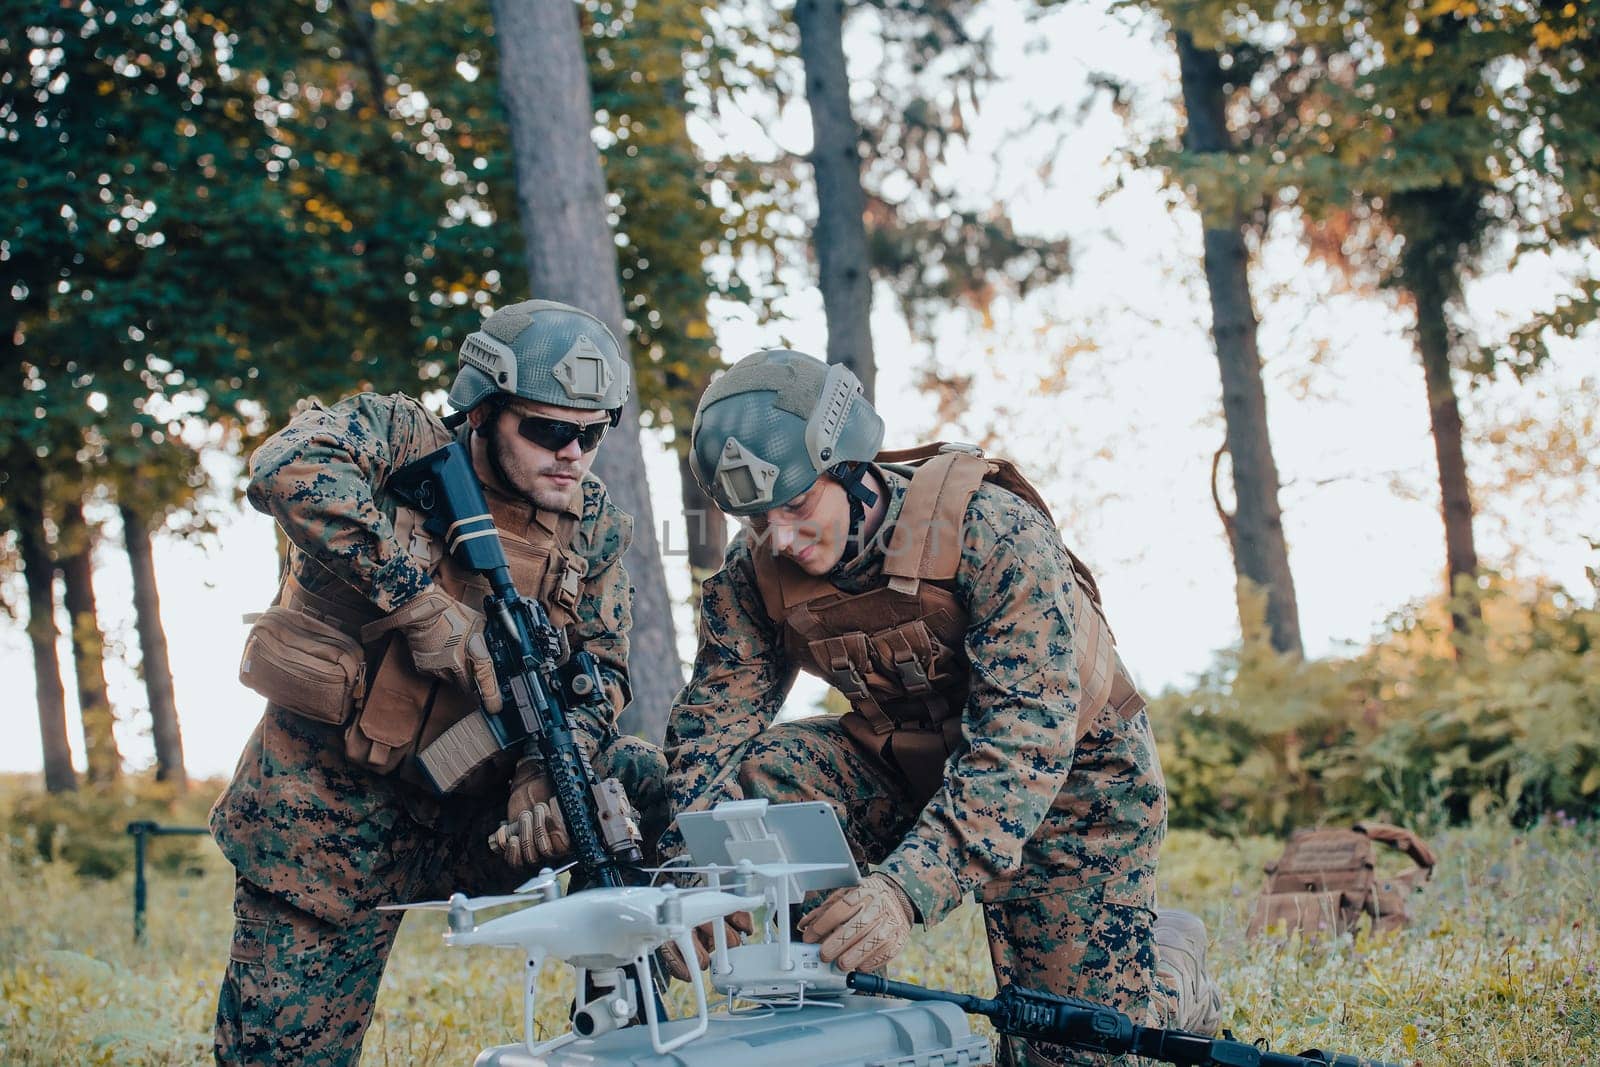 Modern Warfare Soldiers Squad are Using Drone for Scouting and Surveillance During Military Operation in the Forest